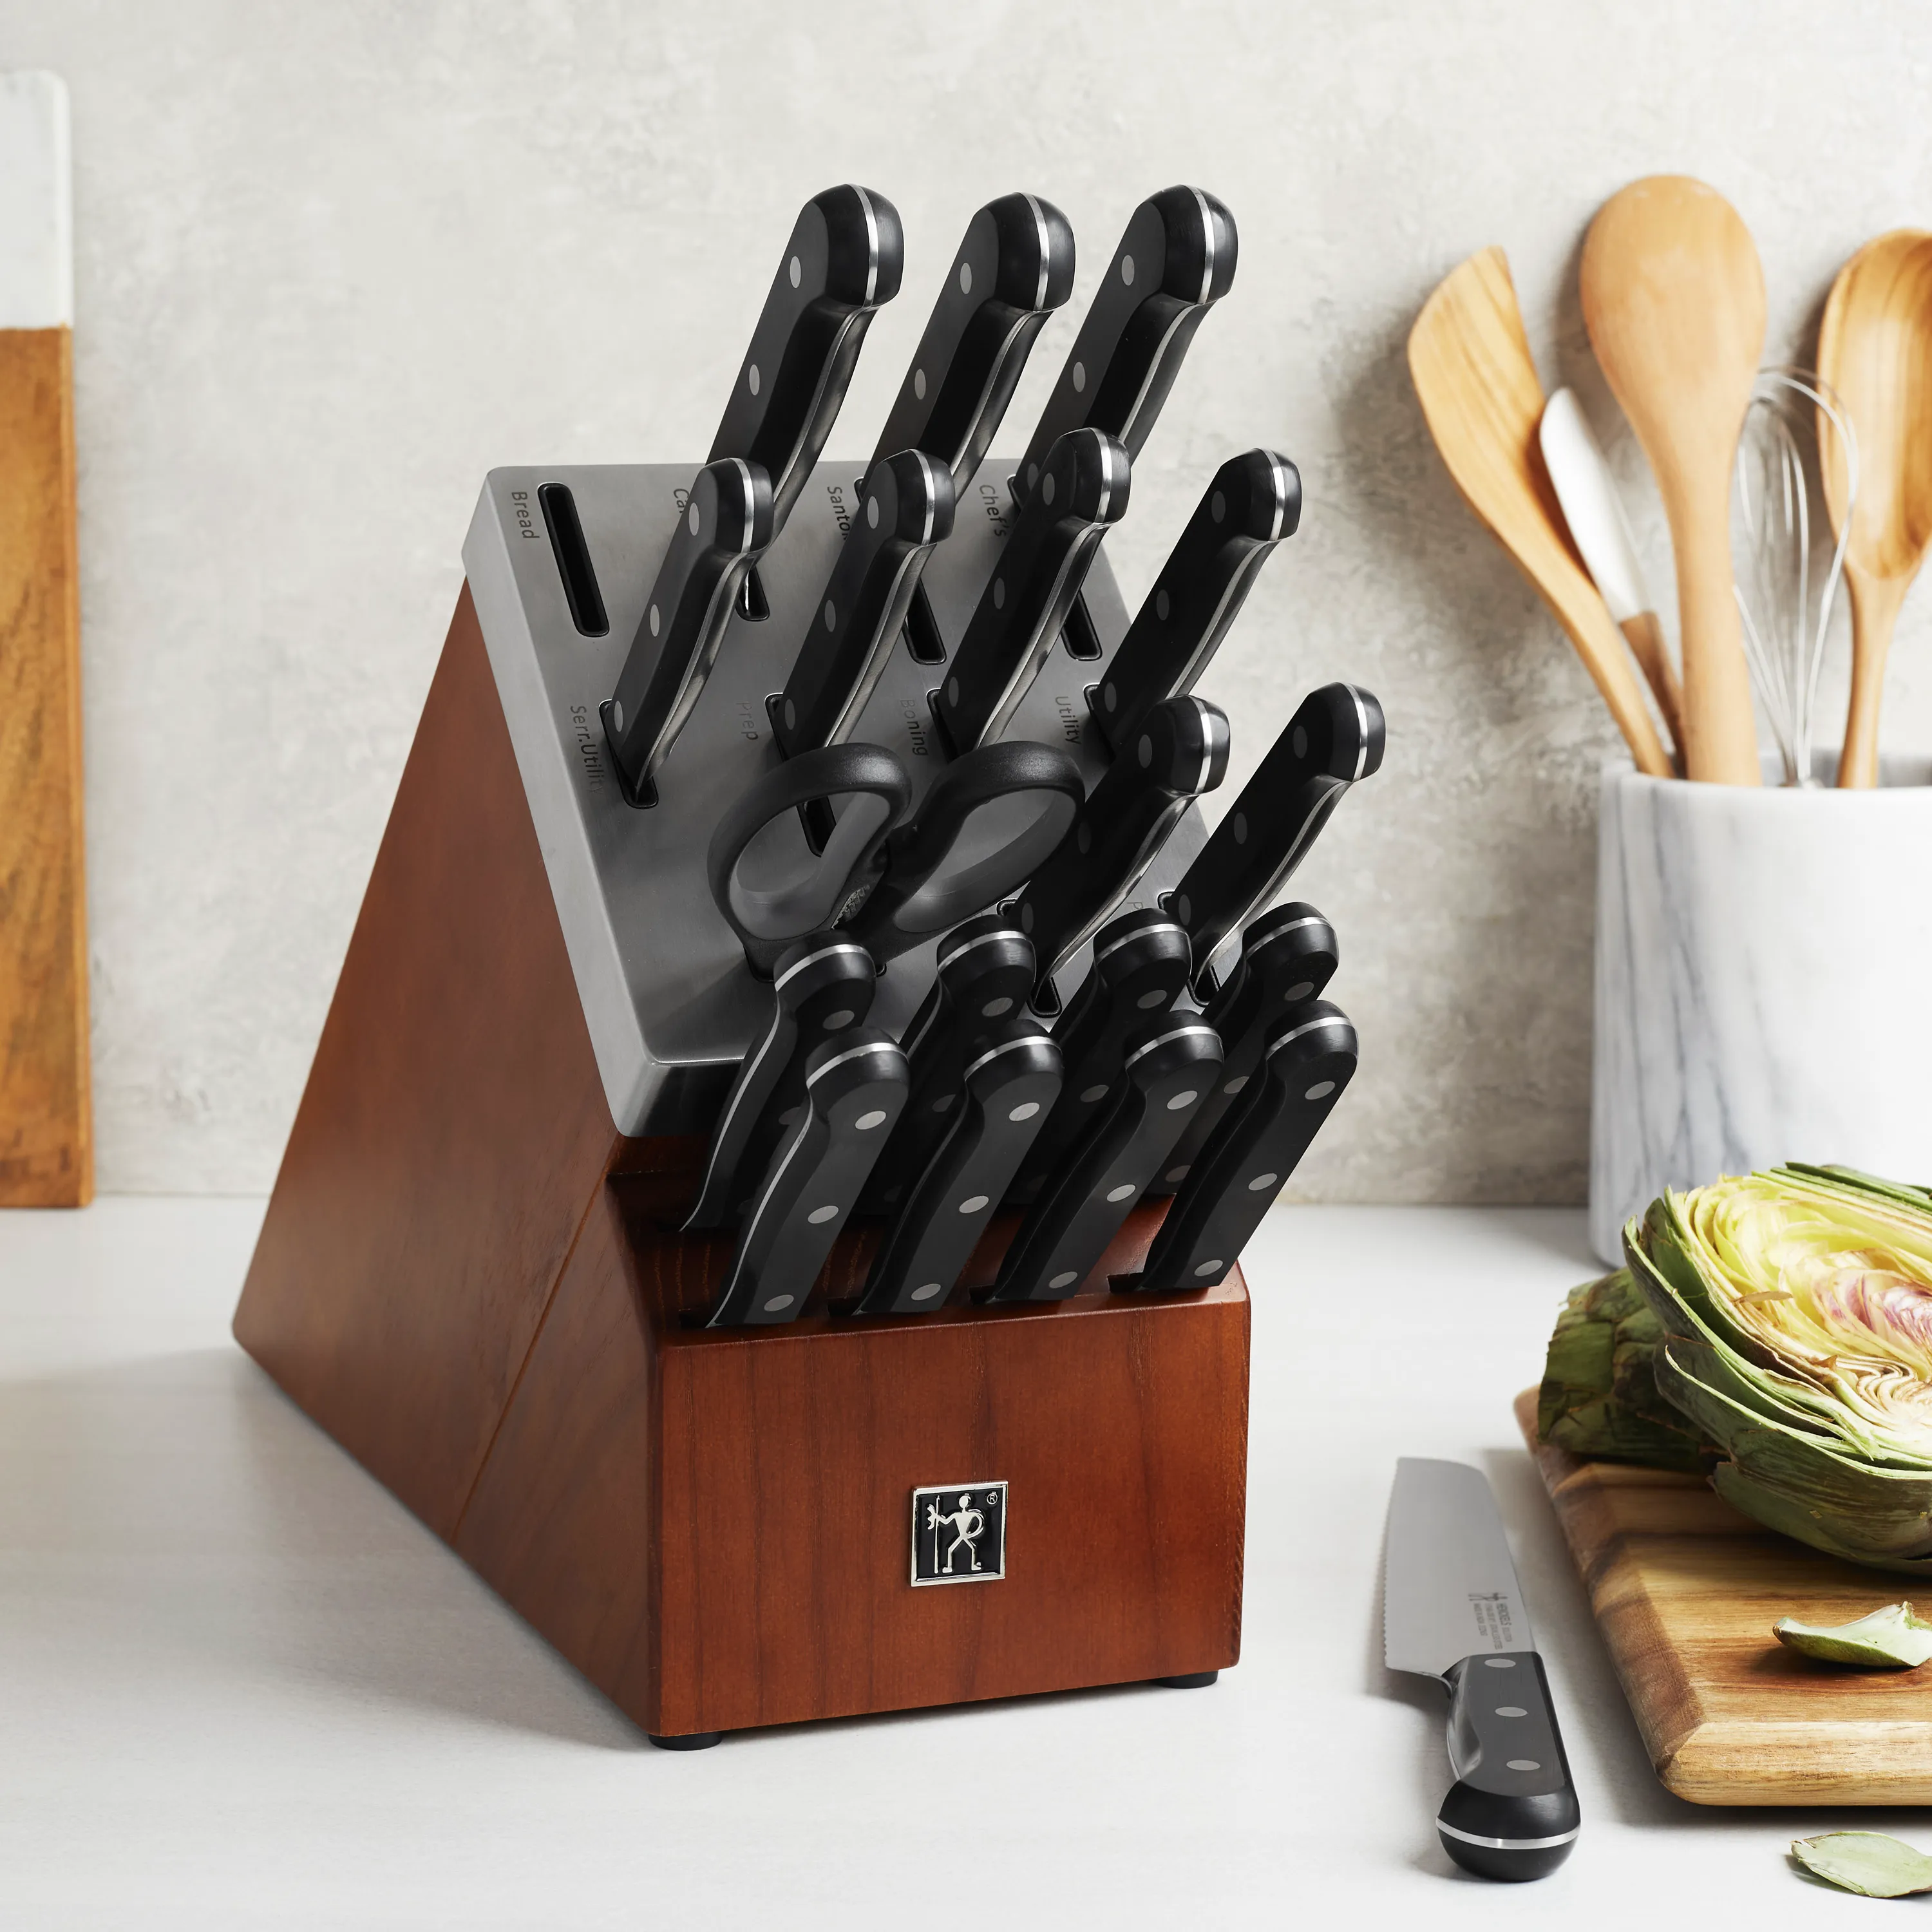 Henckels International Classic with Sharpening Technology 15 Piece Knife Set